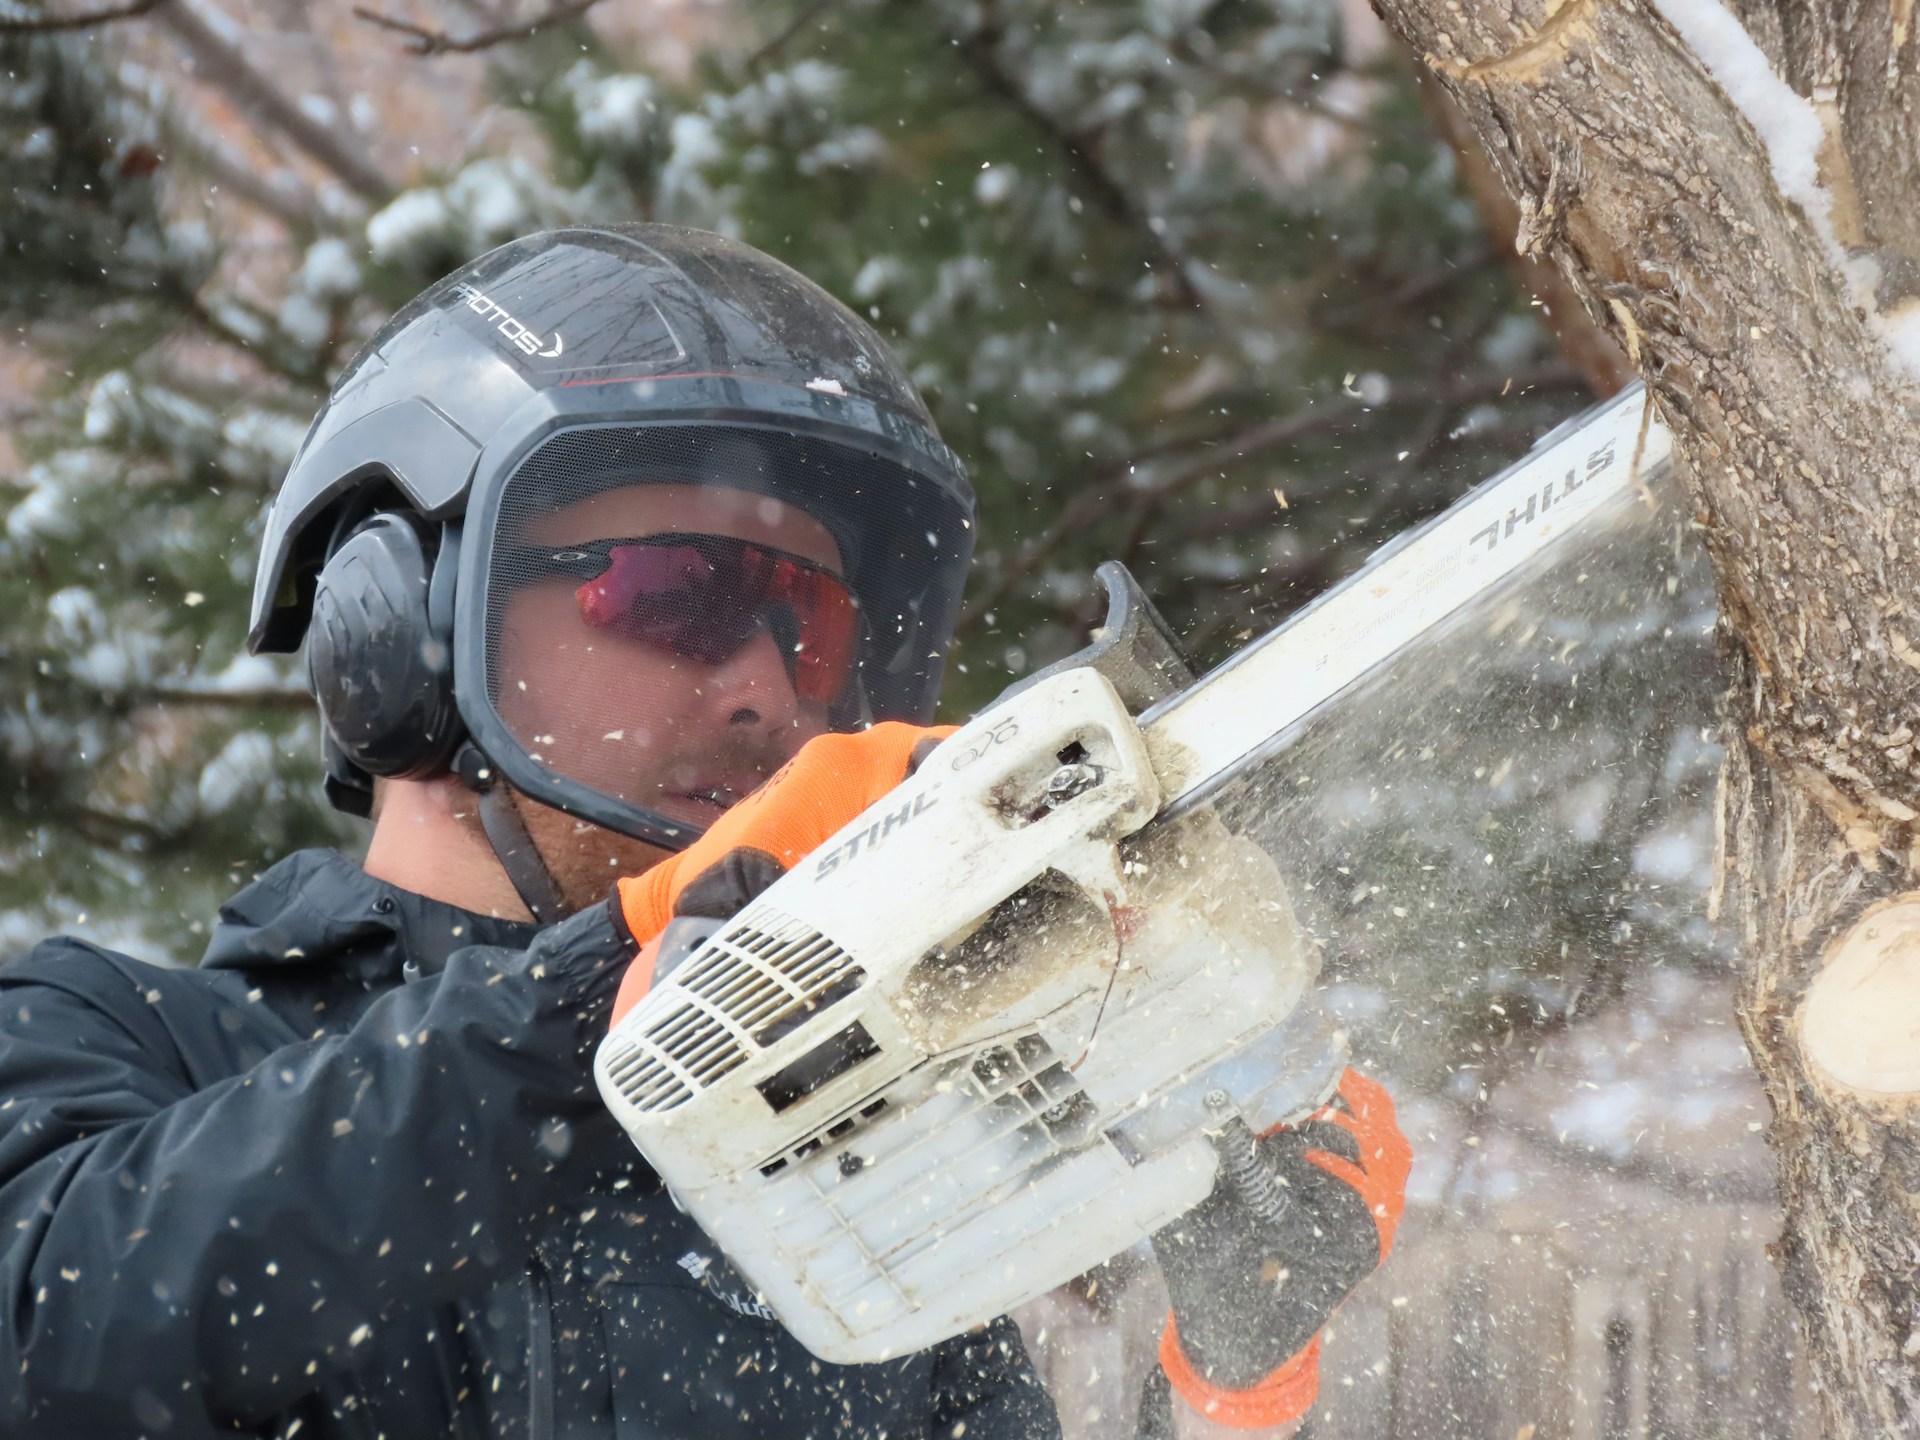 How to care for and Maintain the Chainsaw?